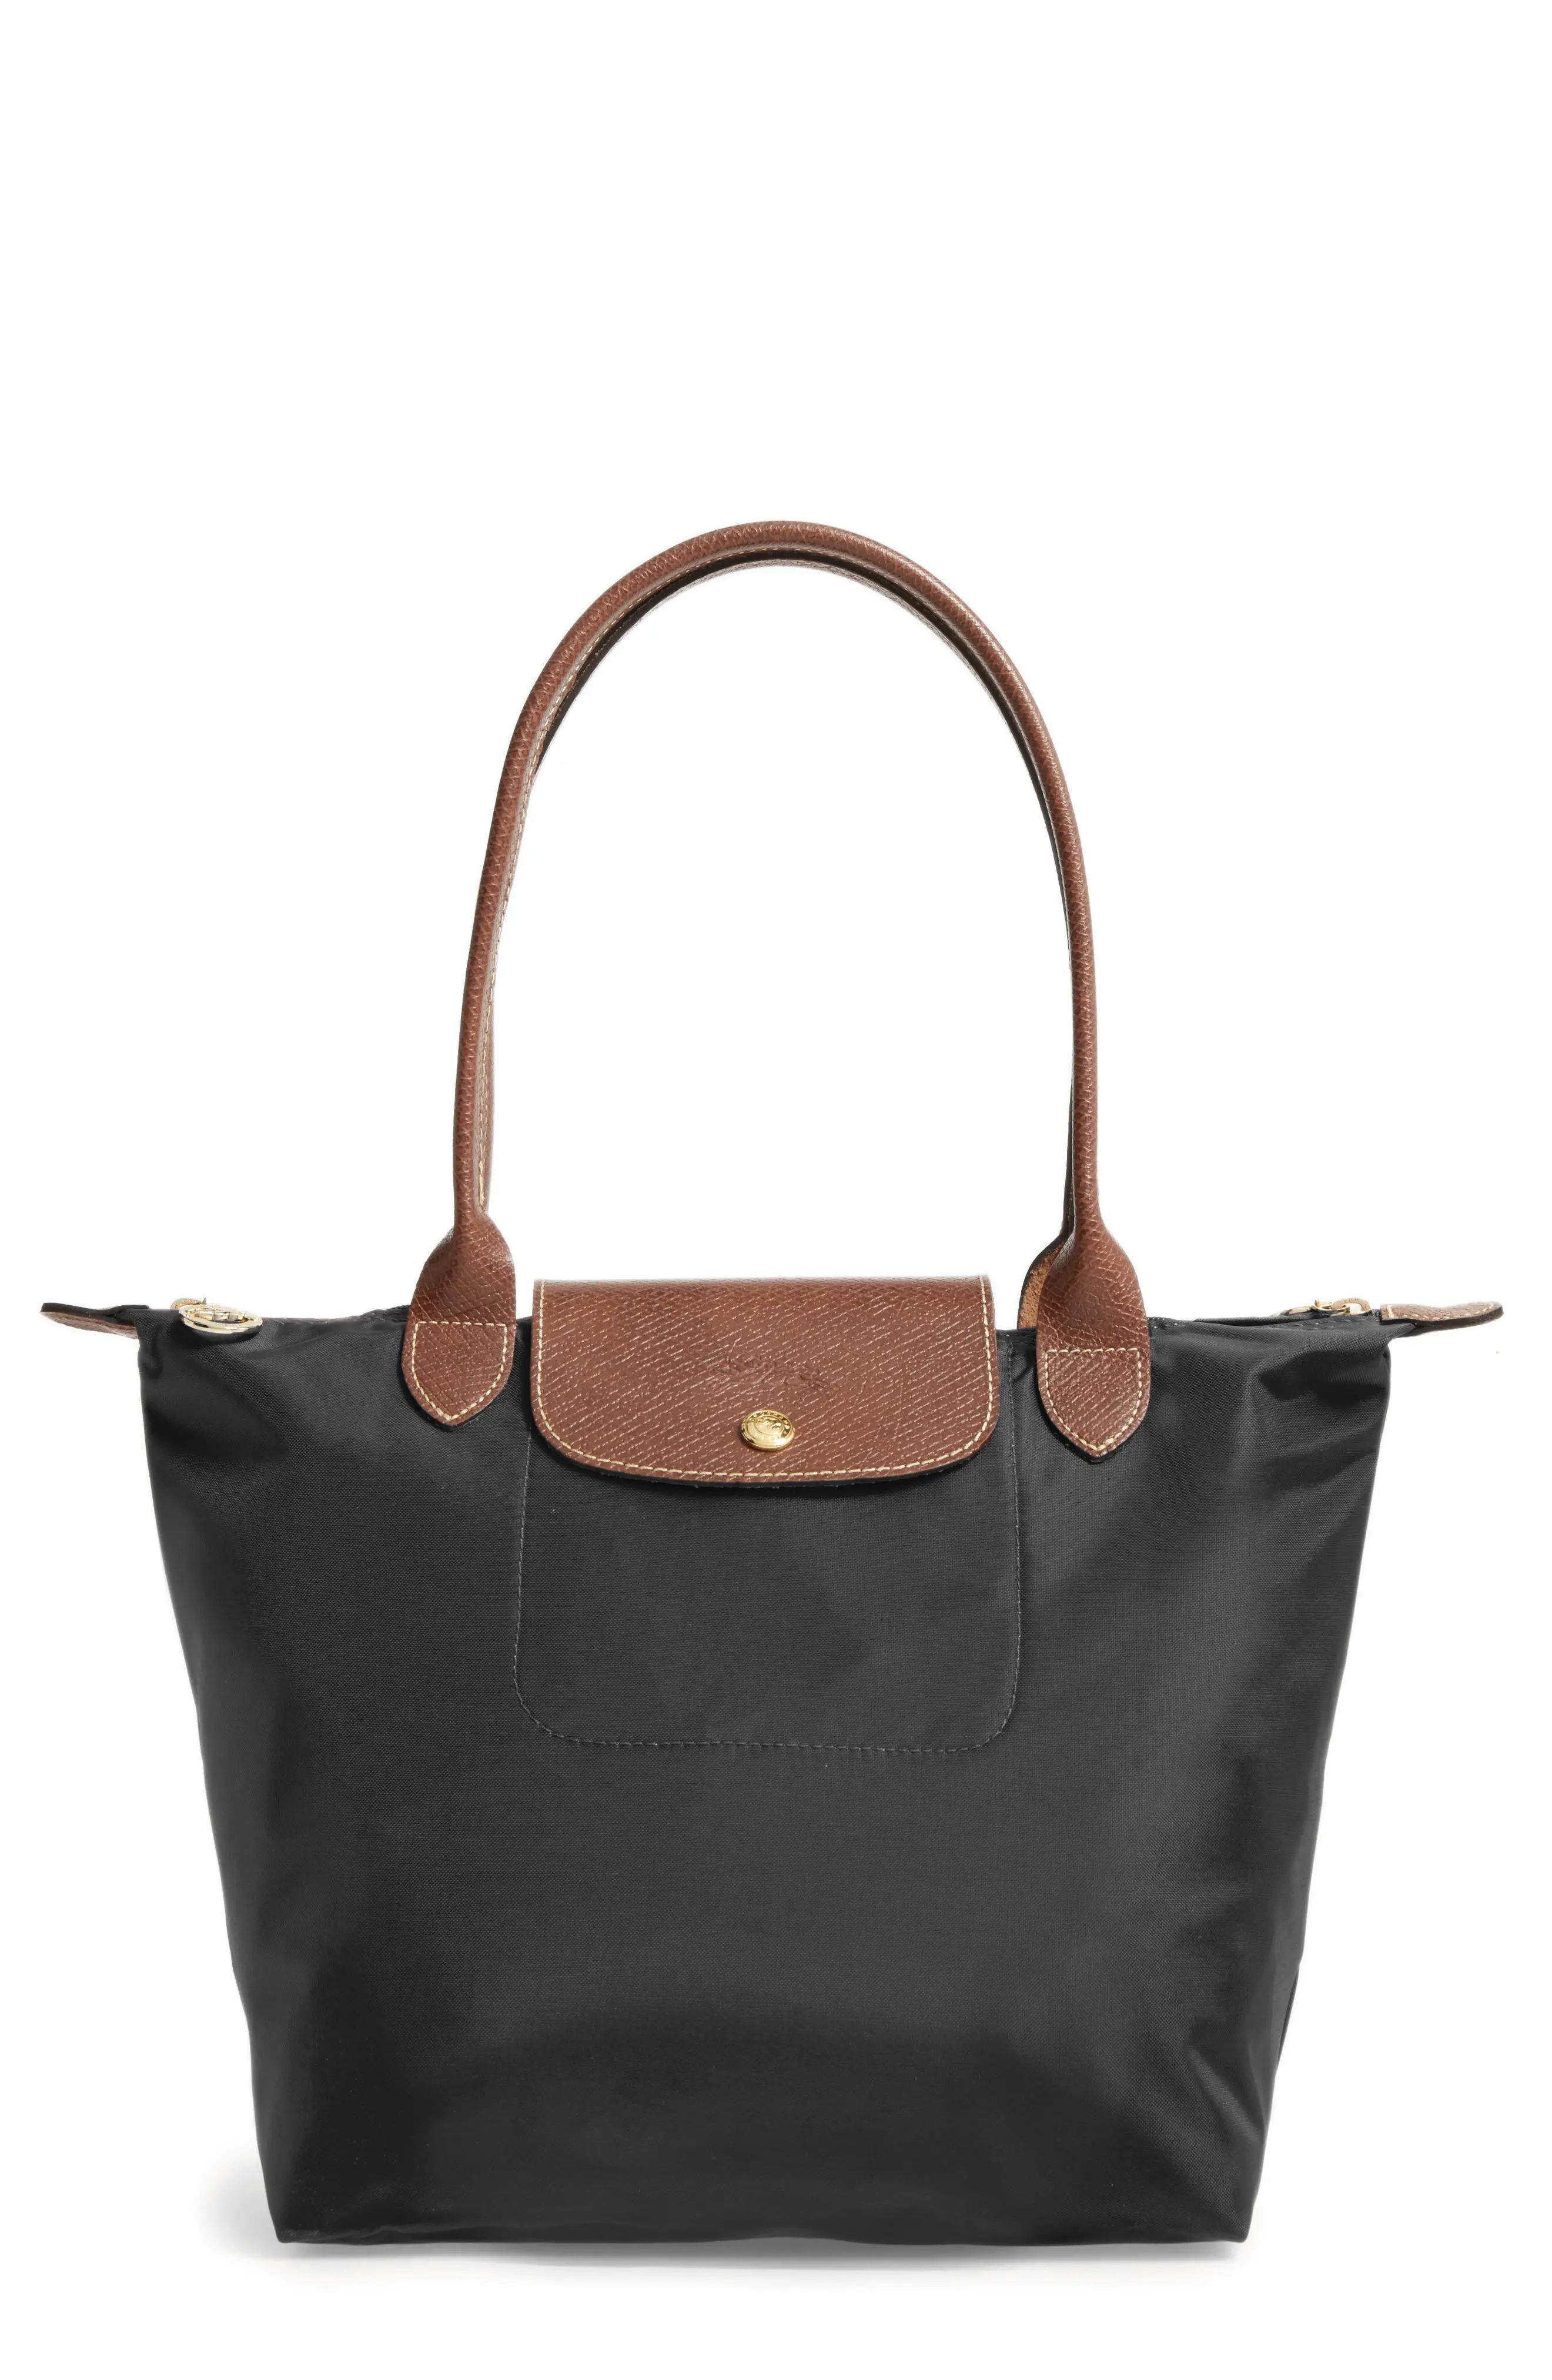 Longchamp Small Le Pliage Nylon Shoulder Tote in Black at Nordstrom | Nordstrom